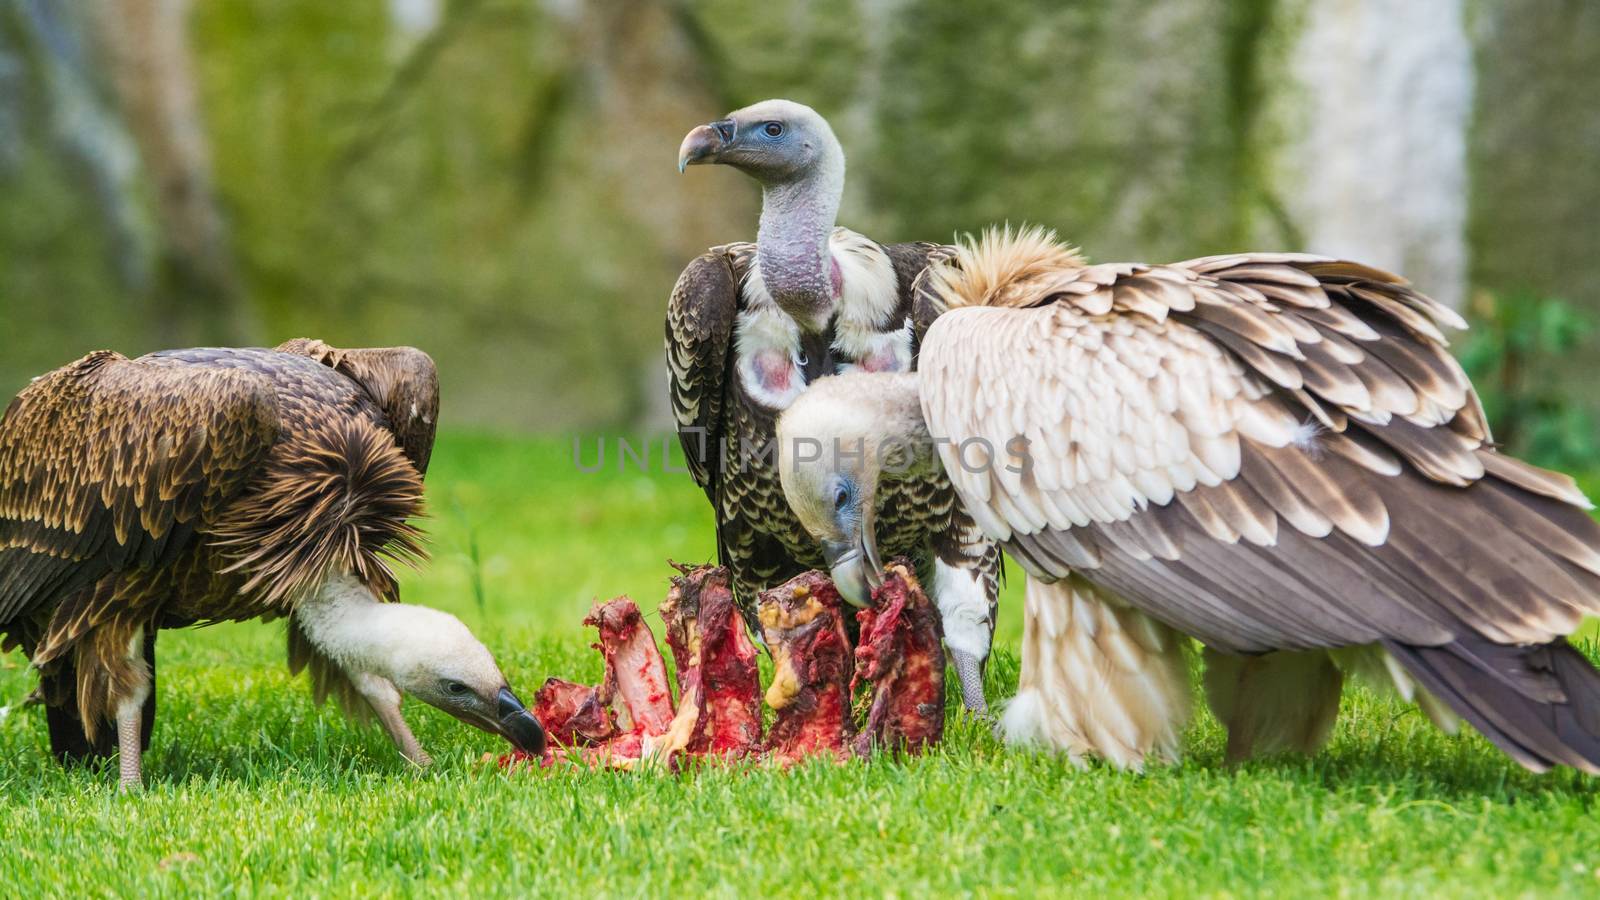 European griffon vultures eating. It is also known as the Eurasian griffon.